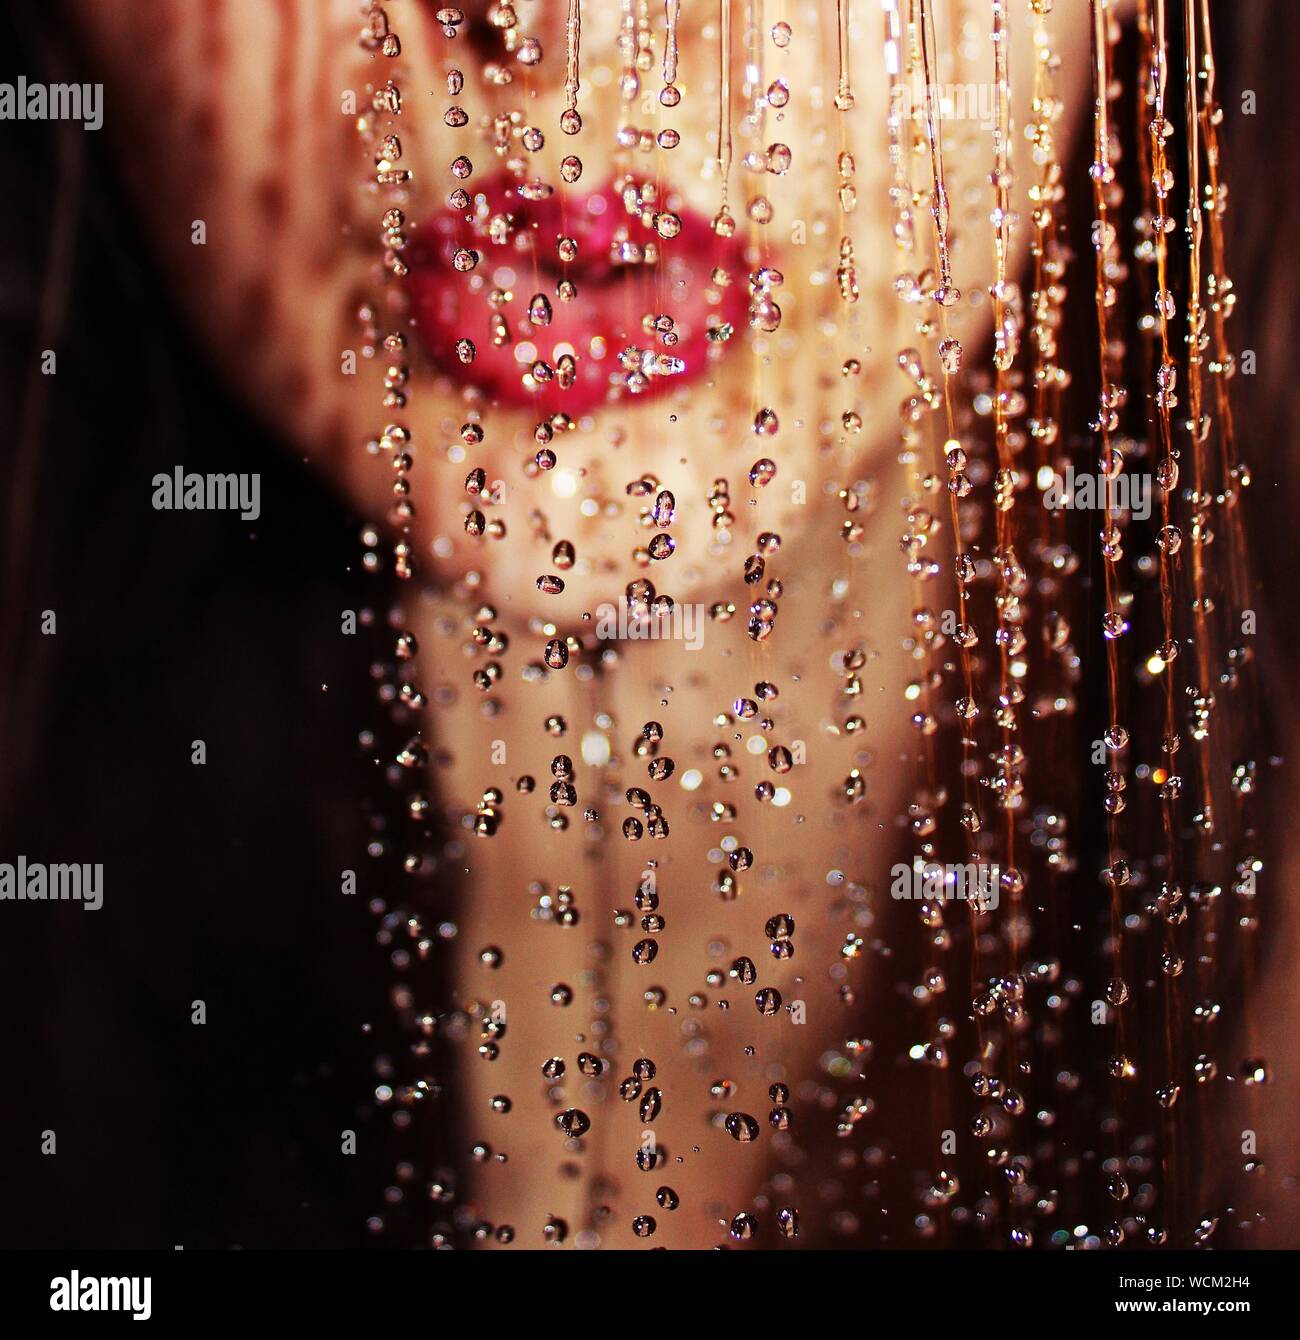 A close up of a girl's face and lips behind water droplets in the rain. Crisp texture of water droplets and blurred out face for a mystic composition. Stock Photo